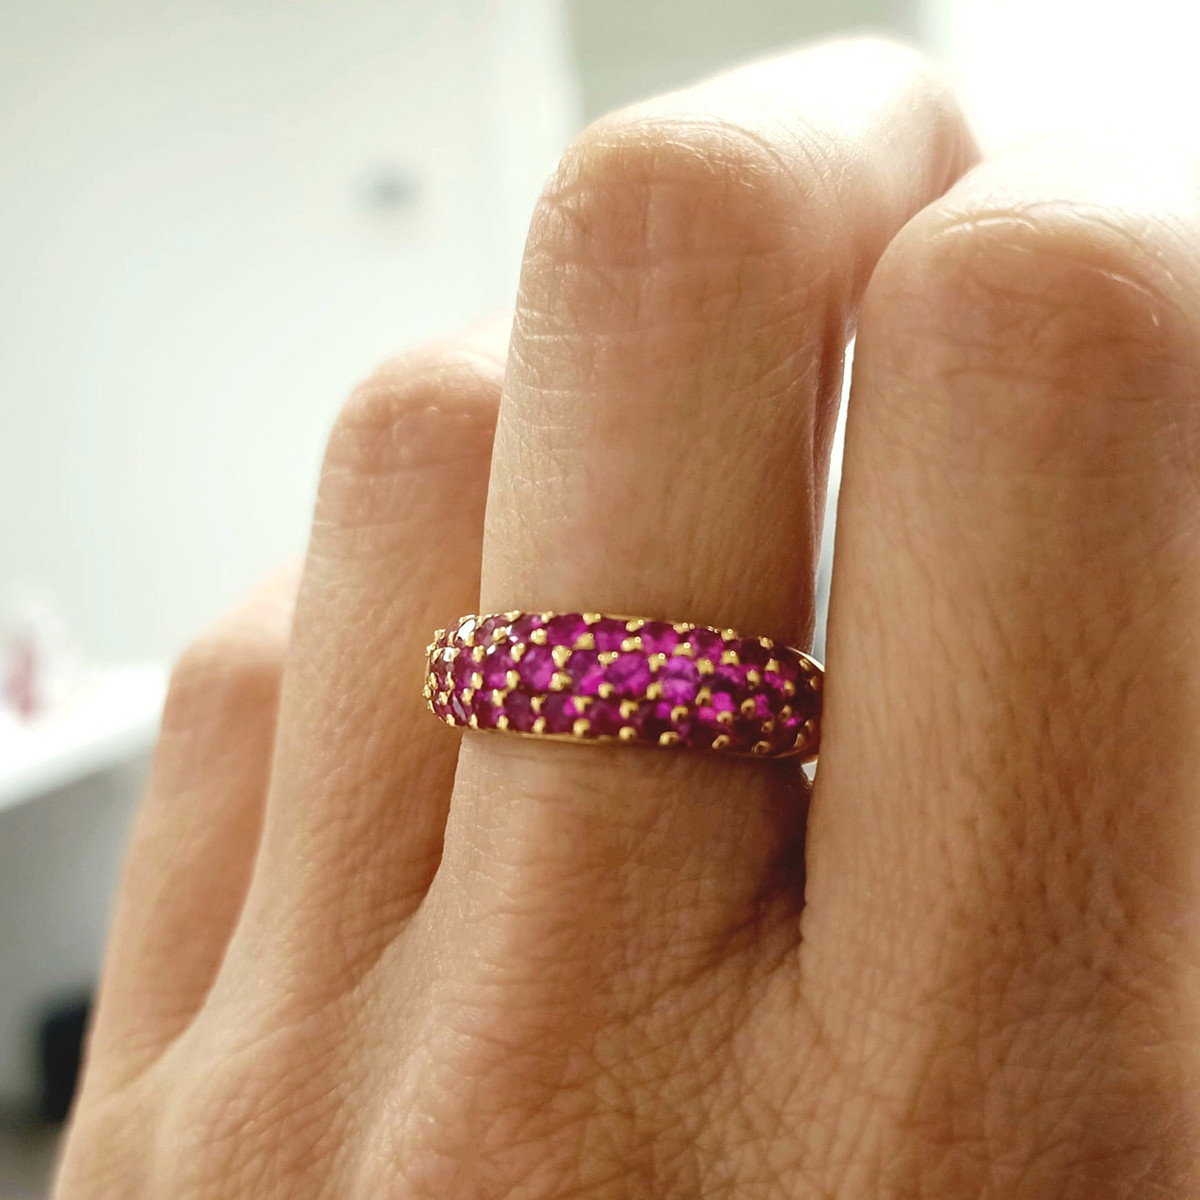 GOLD AND PINK SAPPHIRES RING